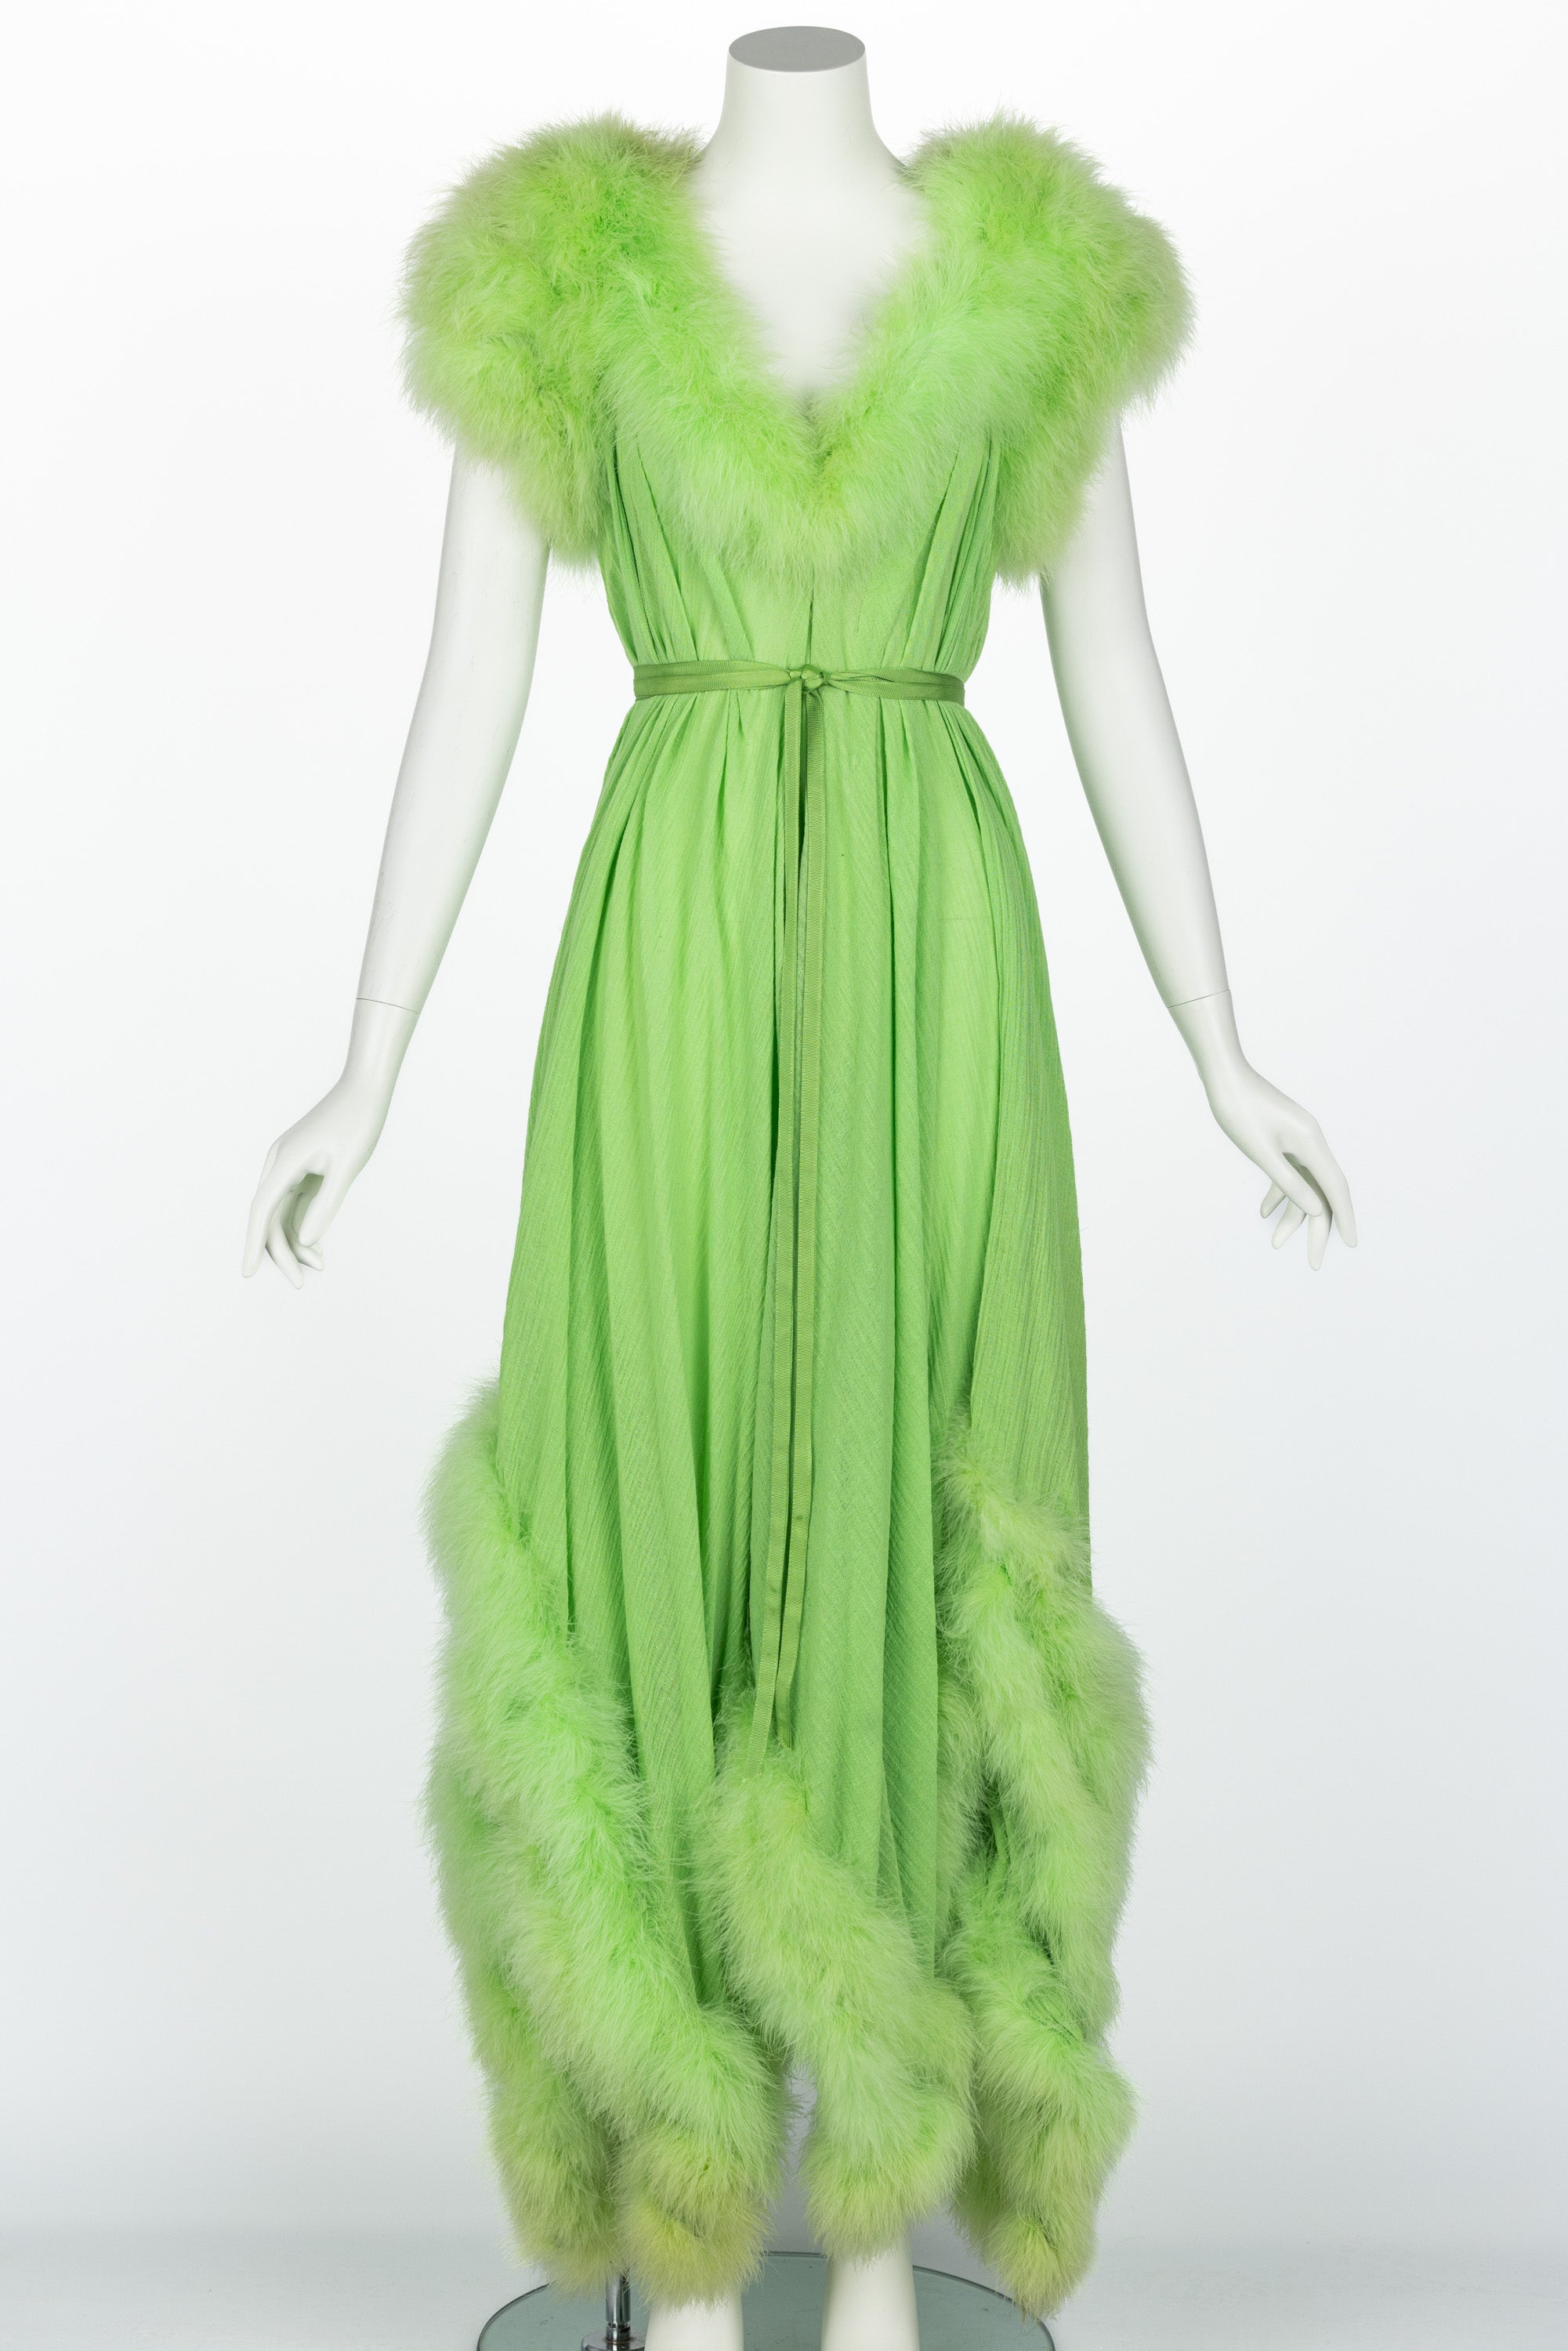 This fabulous vintage maxi dress hits all the right notes. Done in a light green fabric that feels like a cotton/linen blend, it effortlessly evokes the sensual glamour of the 1950s while exuding a timeless femininity. The design begins with a deep